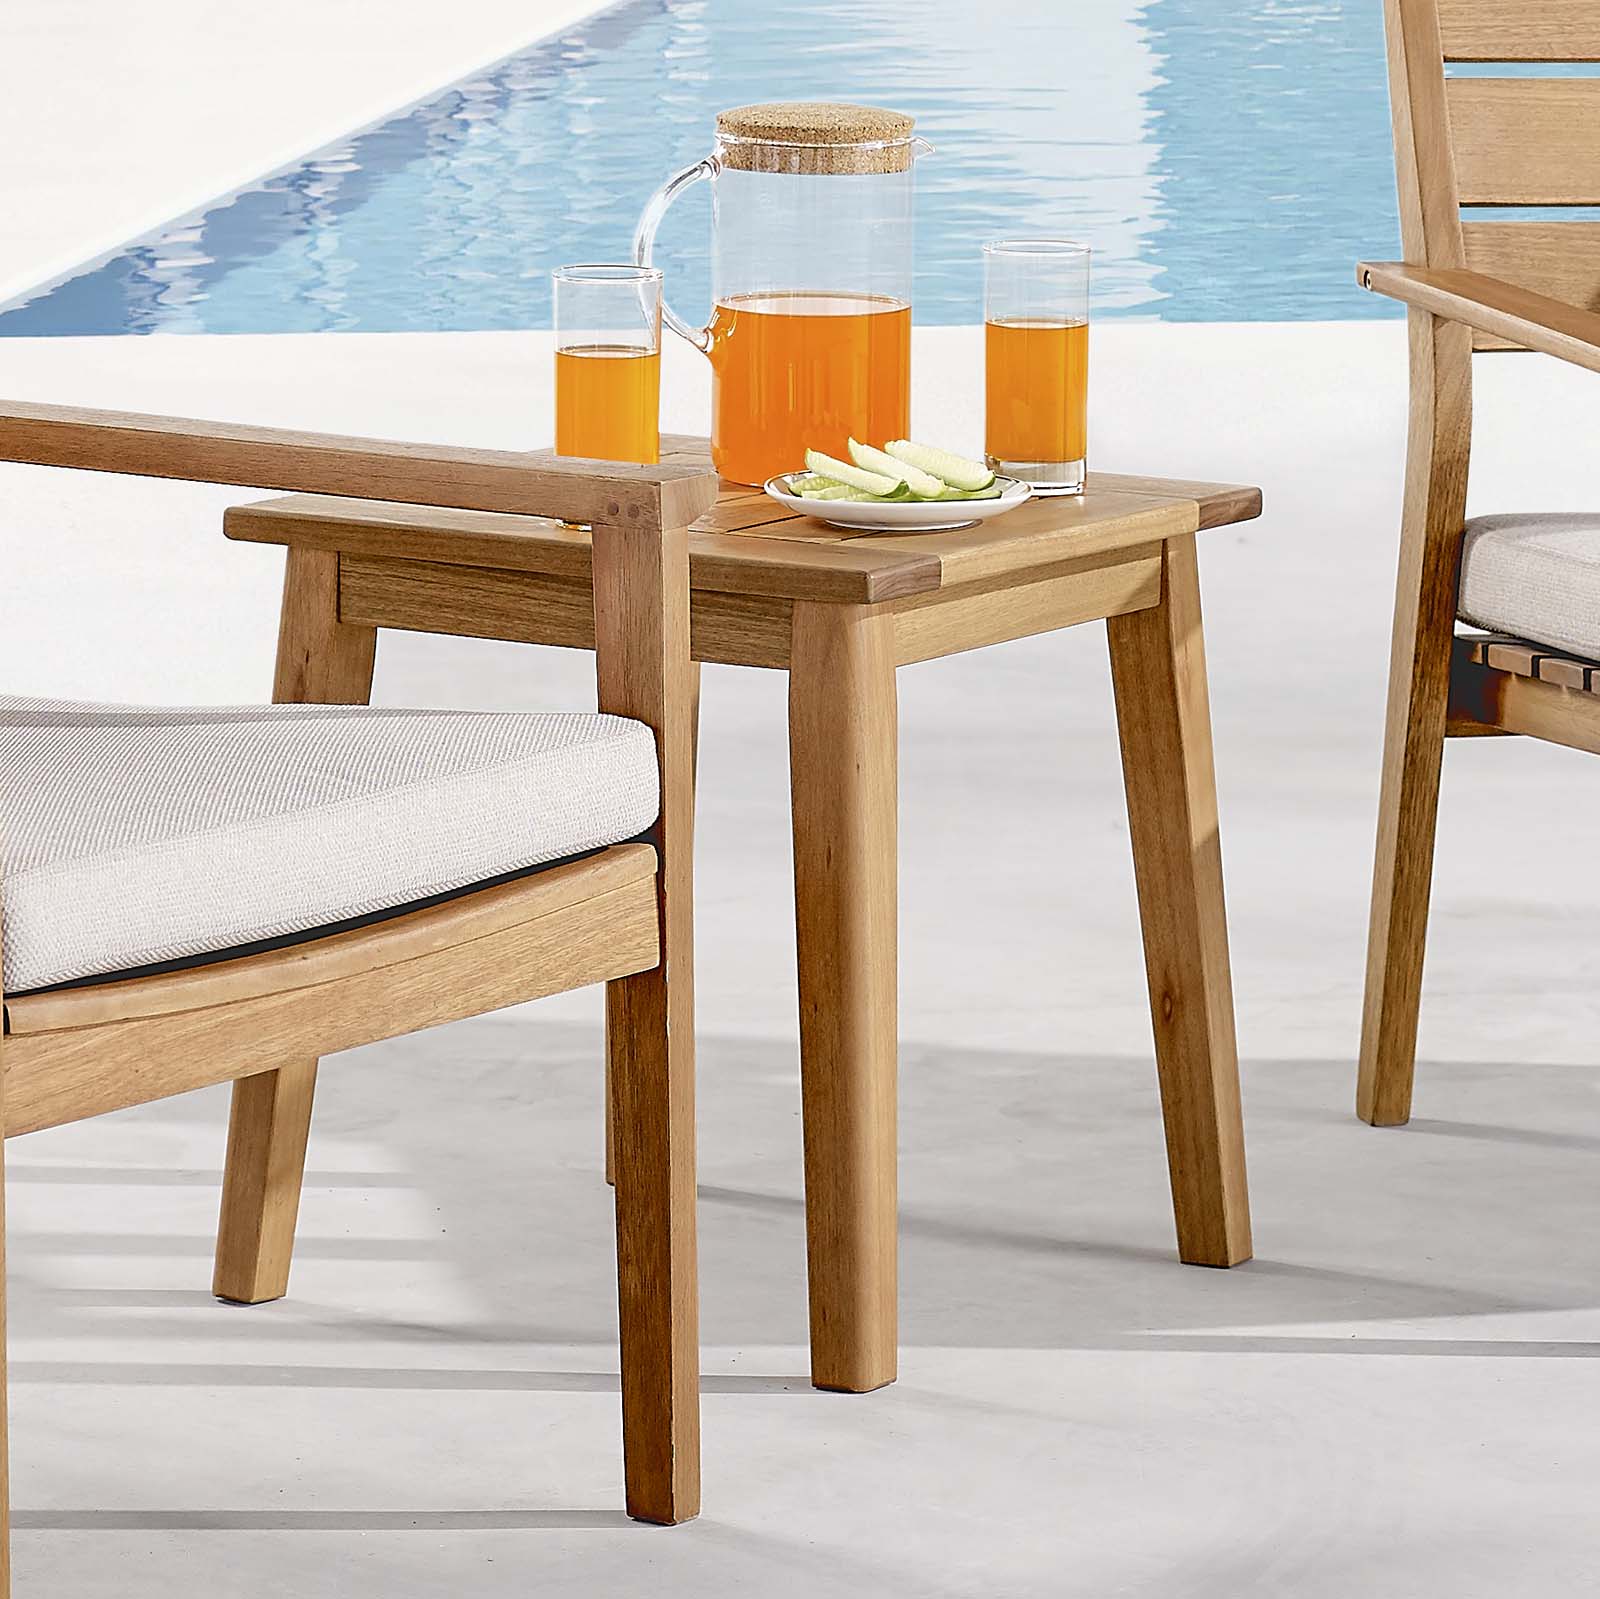 Viewscape Outdoor Patio Ash Wood End Table - East Shore Modern Home Furnishings